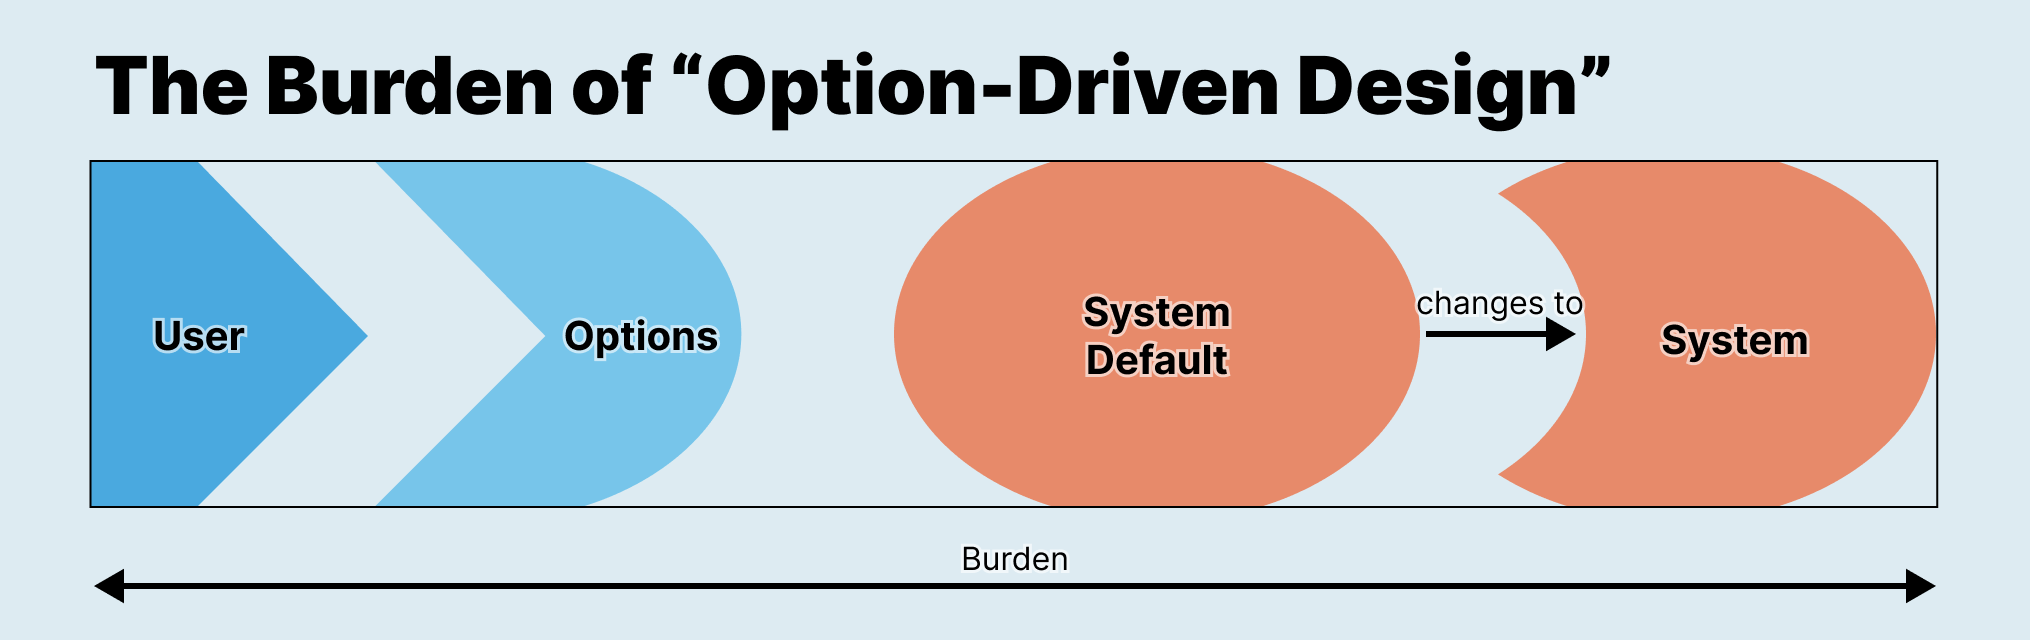 The Burden of Option-Driven Design. Diagram showing a user and a system. The user leverages options, which changes the system. Both the user and system have a burden.